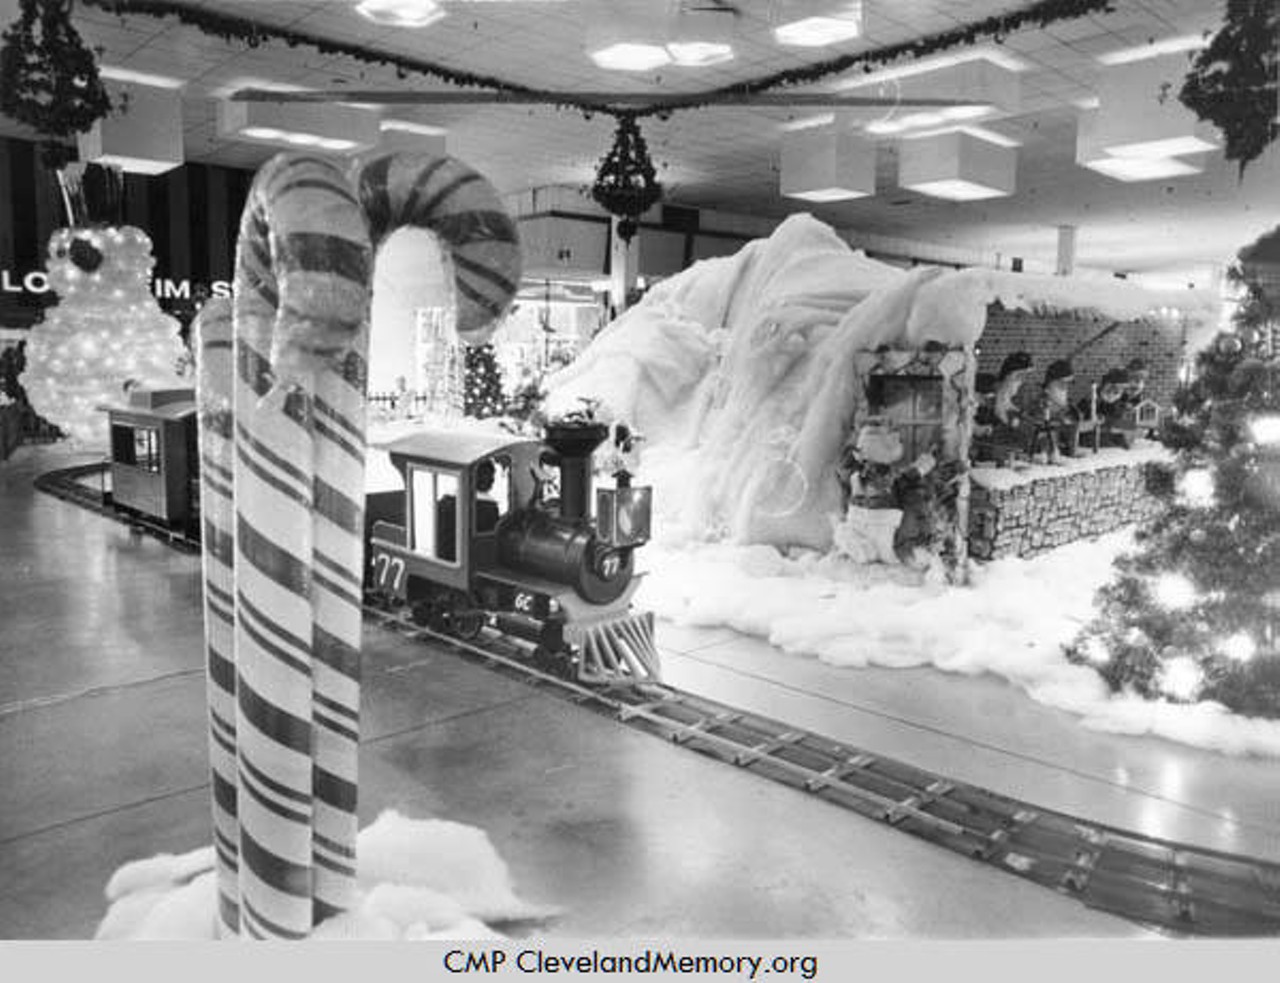 Westgate Mall holiday display, featuring giant candy canes and miniature locomotive. 1979